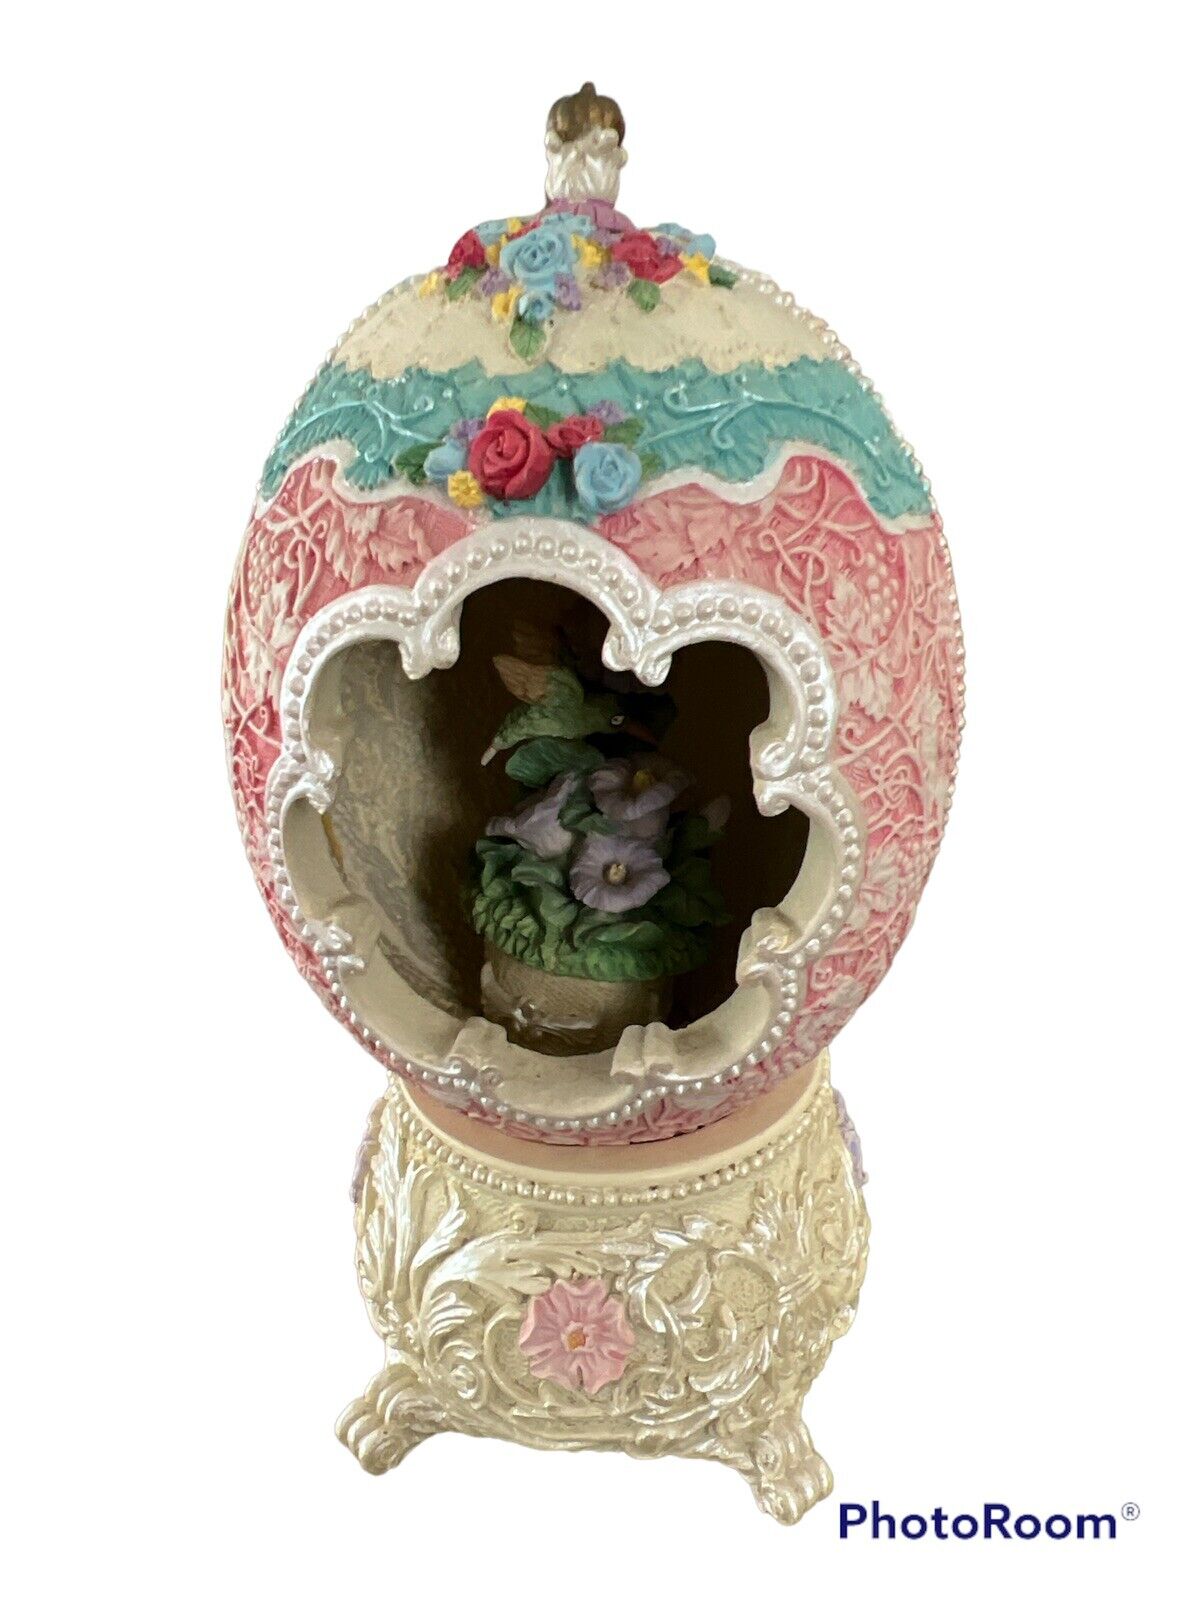 Vintage Music Box Bird Beautiful Egg Shape Plays Romeo & Juliet A Time For Us